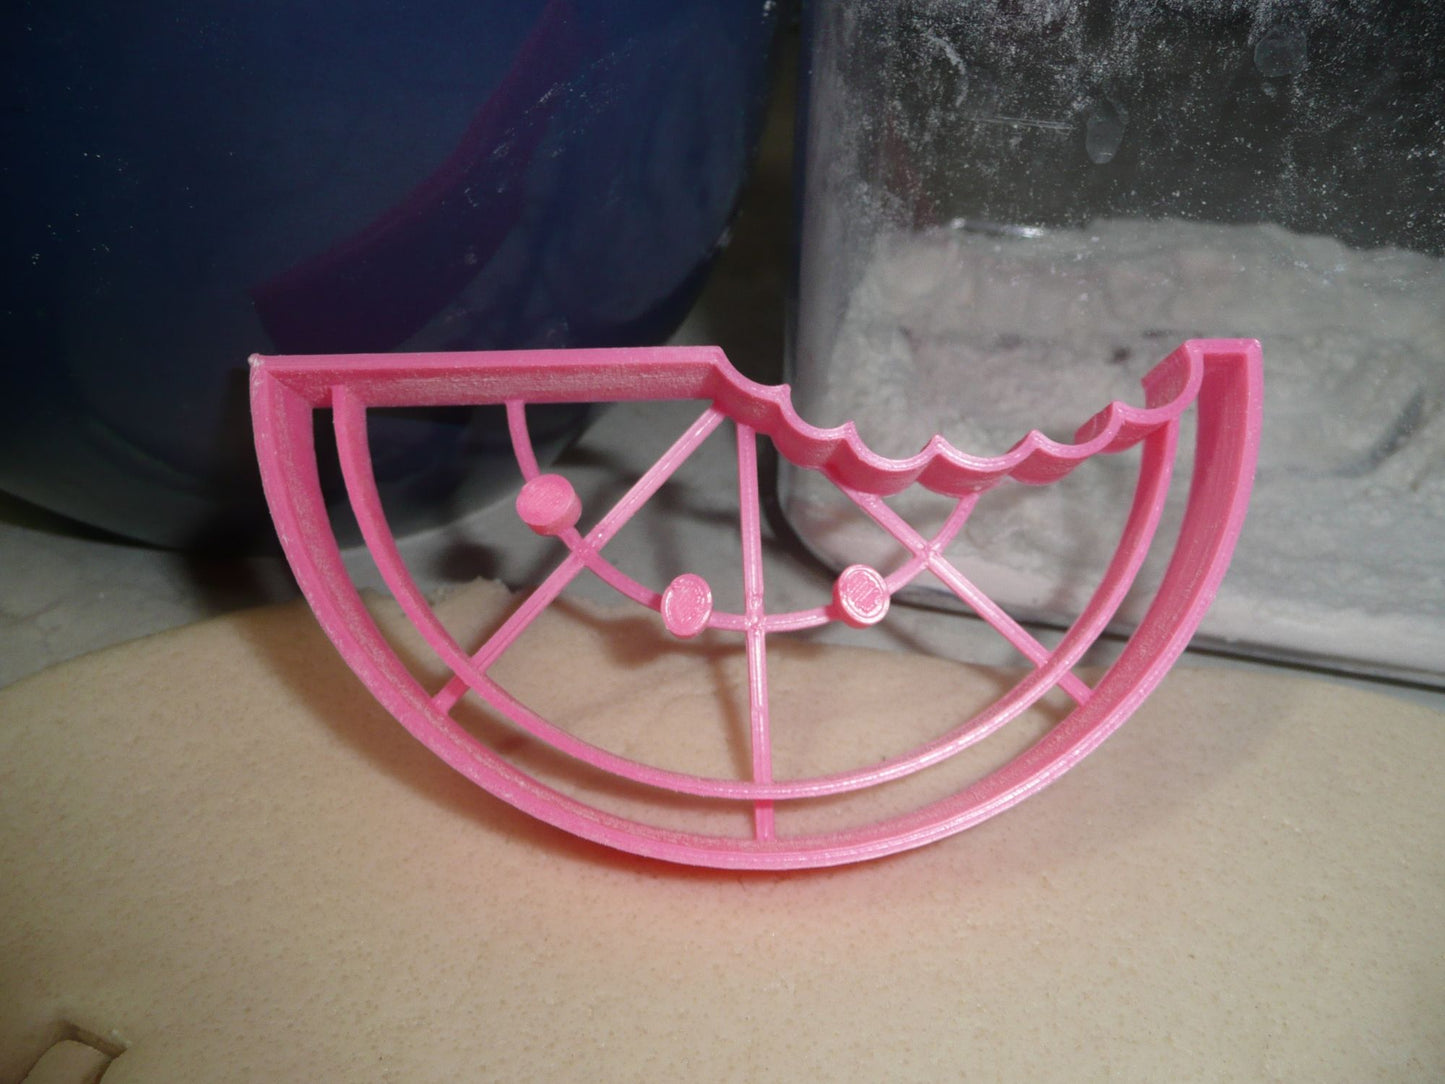 Watermelon Eating Contest Fruit Slice Wedge Set Of 3 Cookie Cutters USA PR1535